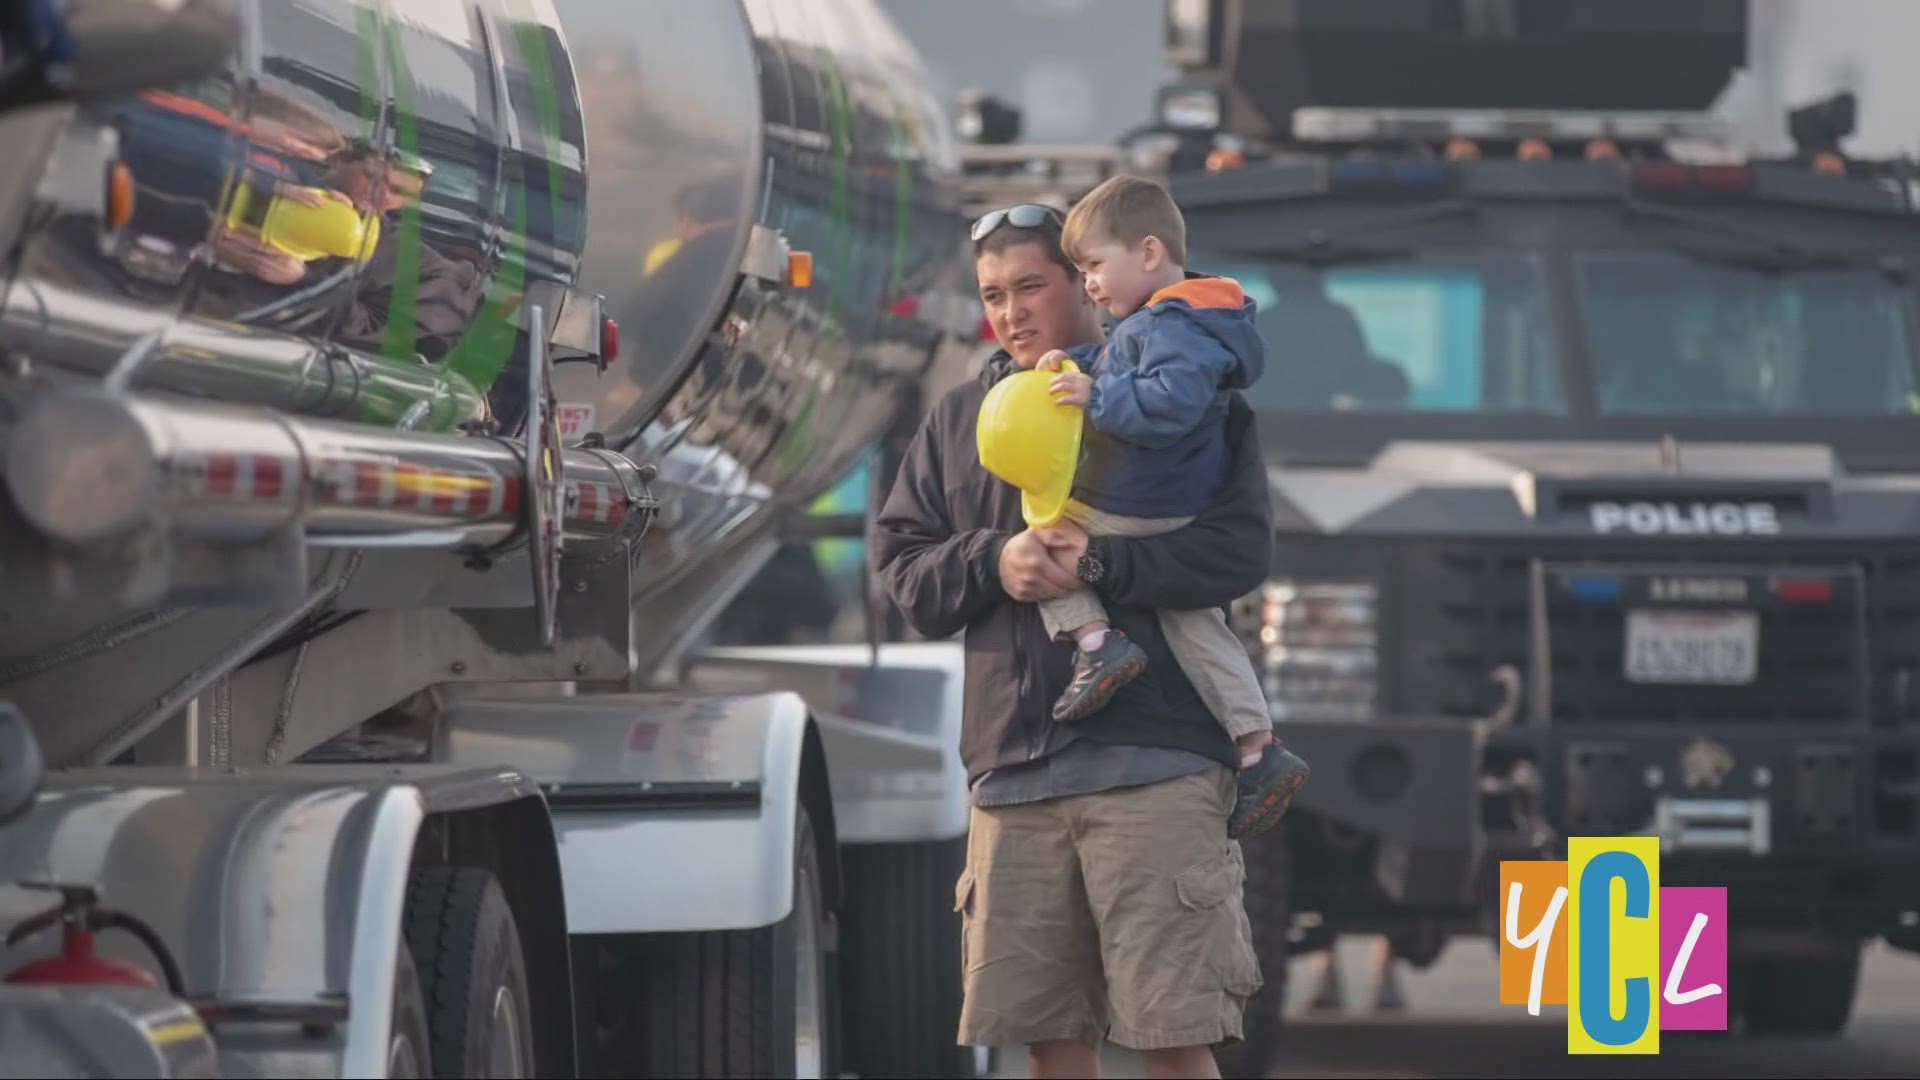 Kids can learn all about 50 trucks, ring the bell, honk the horn, climb on them, and talk to the owner of the truck and learn more about that career.